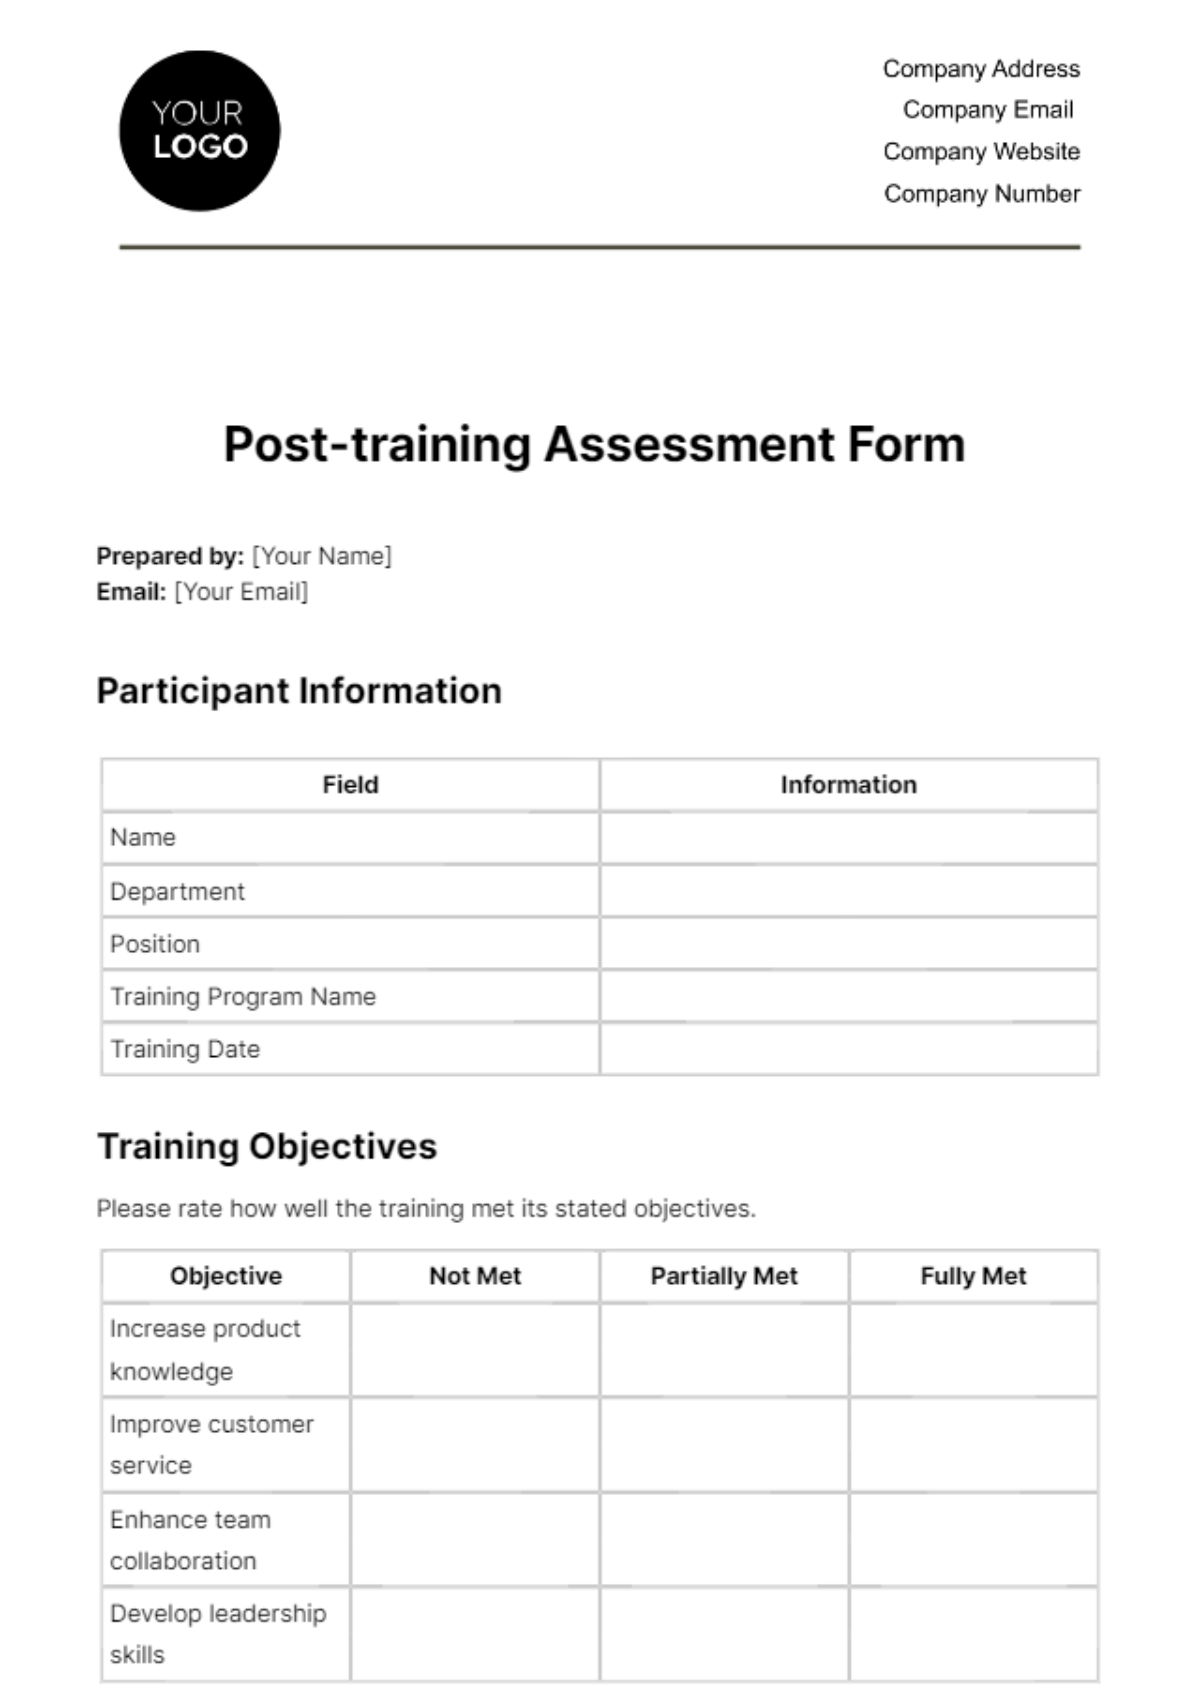 Free Post-training Assessment Form HR Template